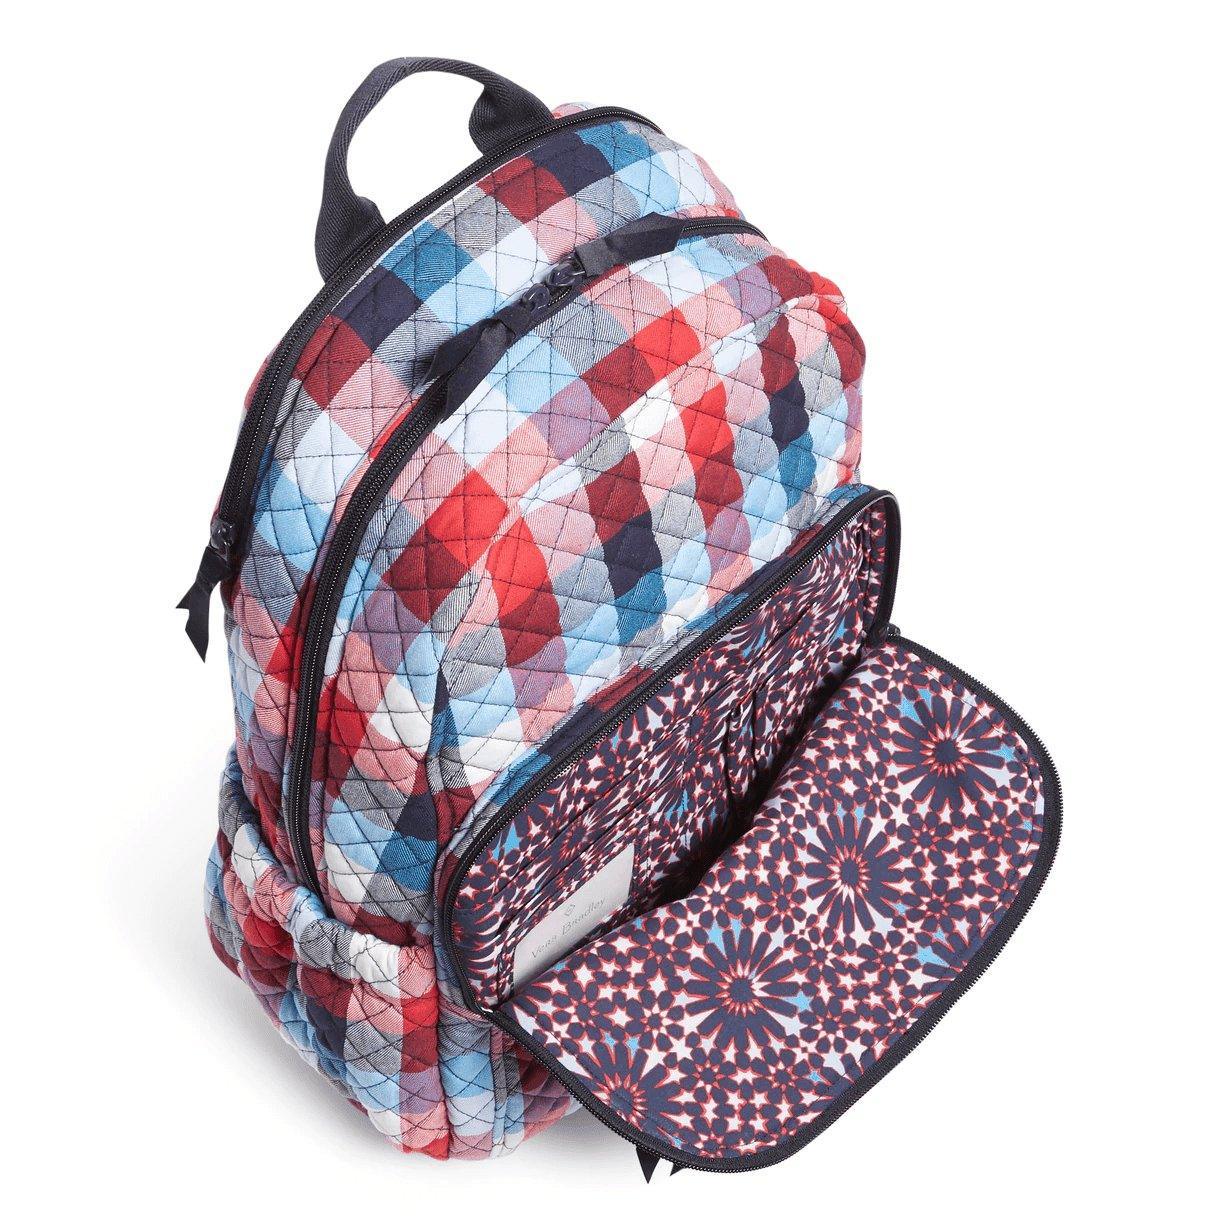 Campus Backpack Patriotic Plaid - Sunshine and Grace Gifts